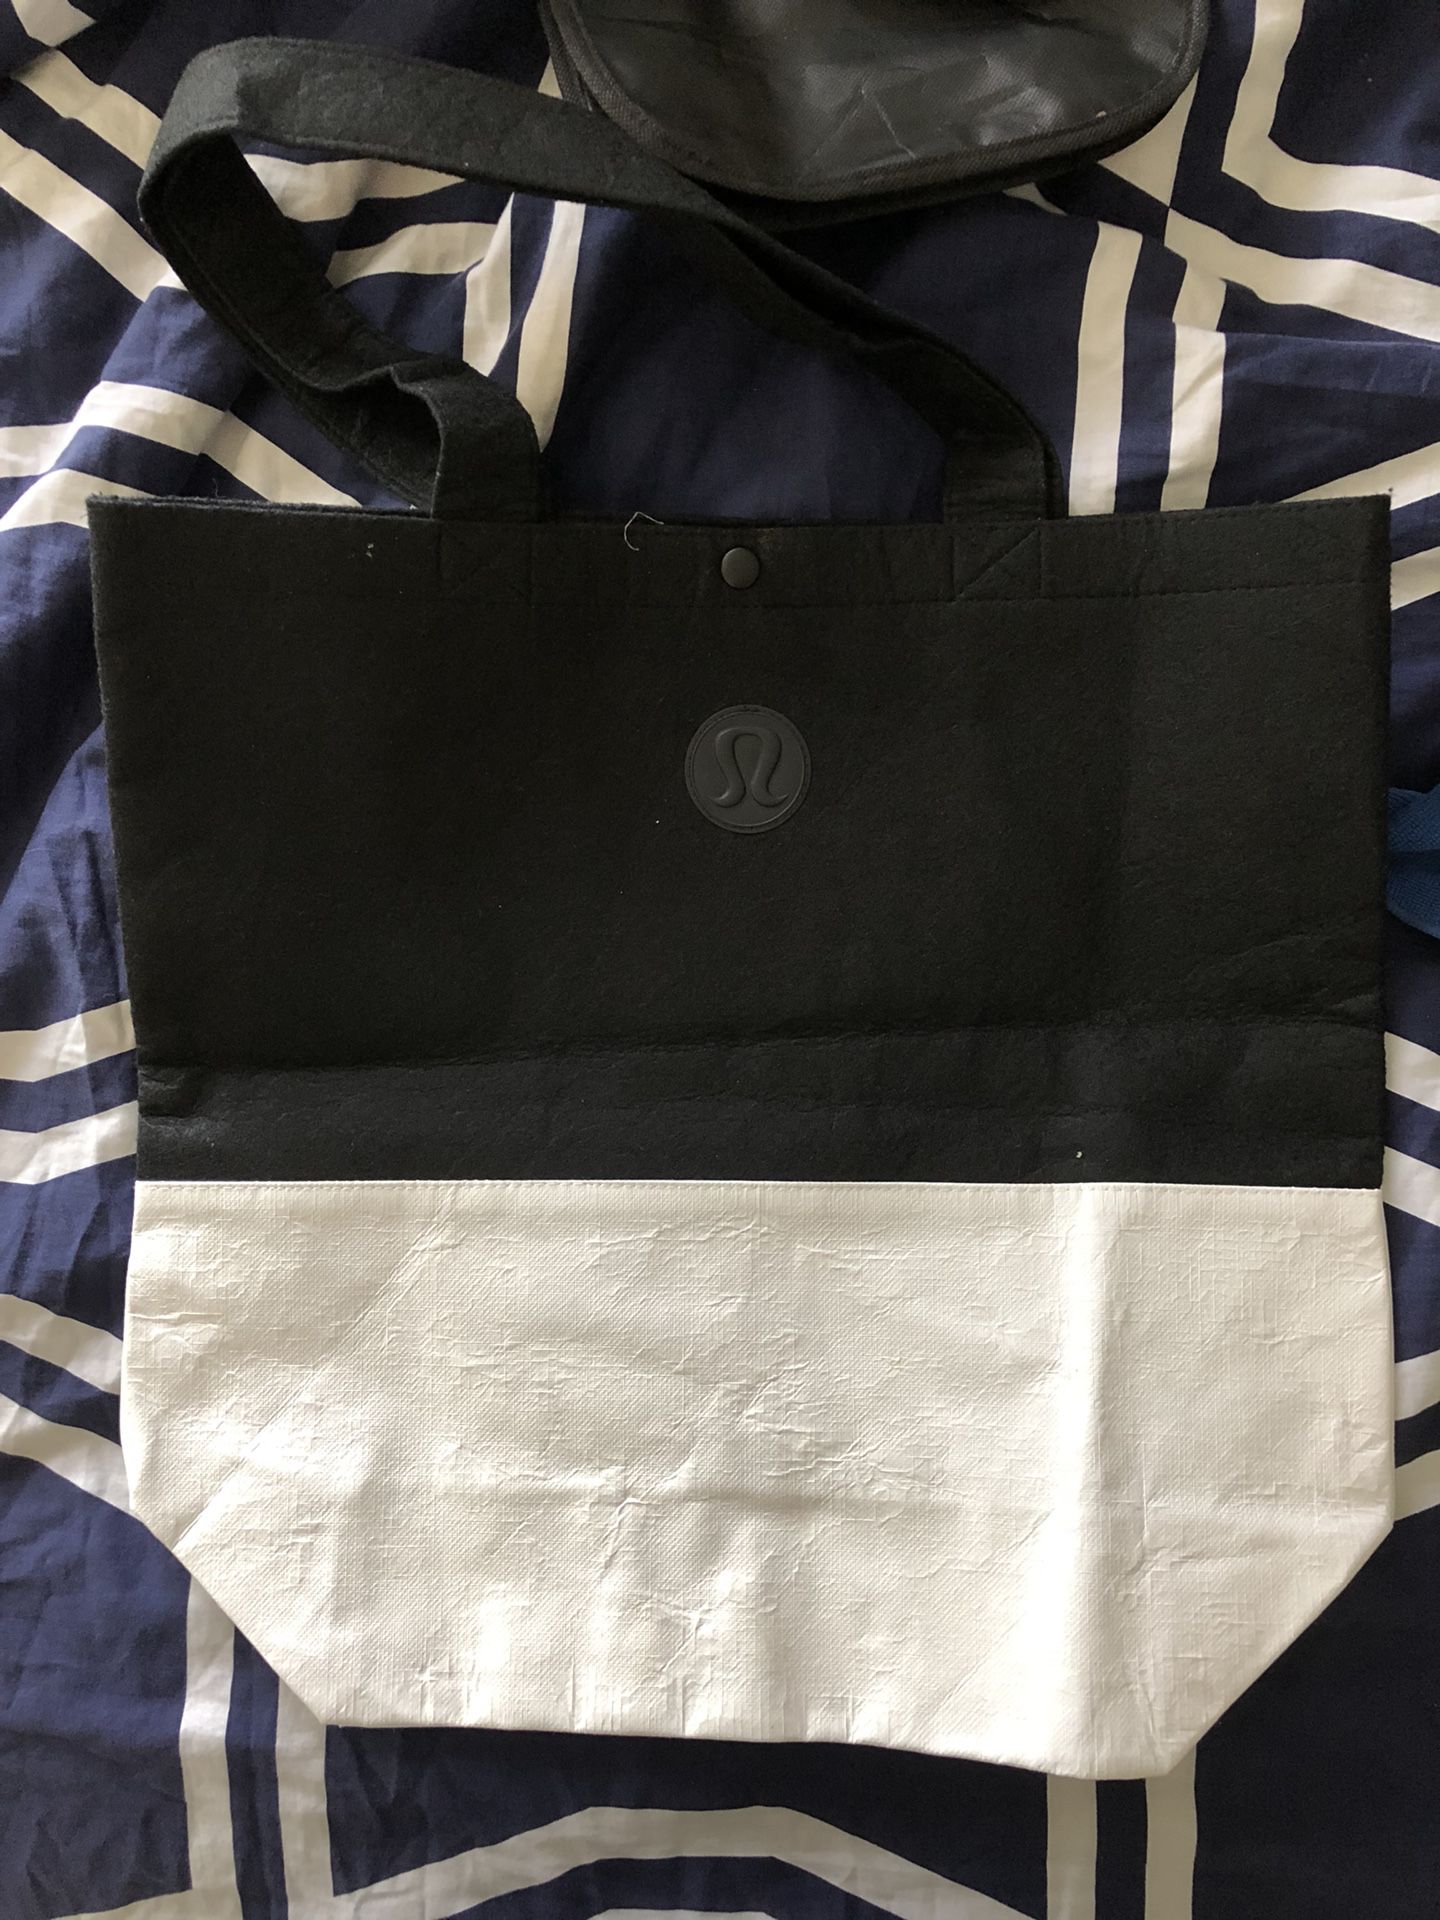 Limited edition Lululemon match point tennis bag for Sale in San Diego, CA  - OfferUp